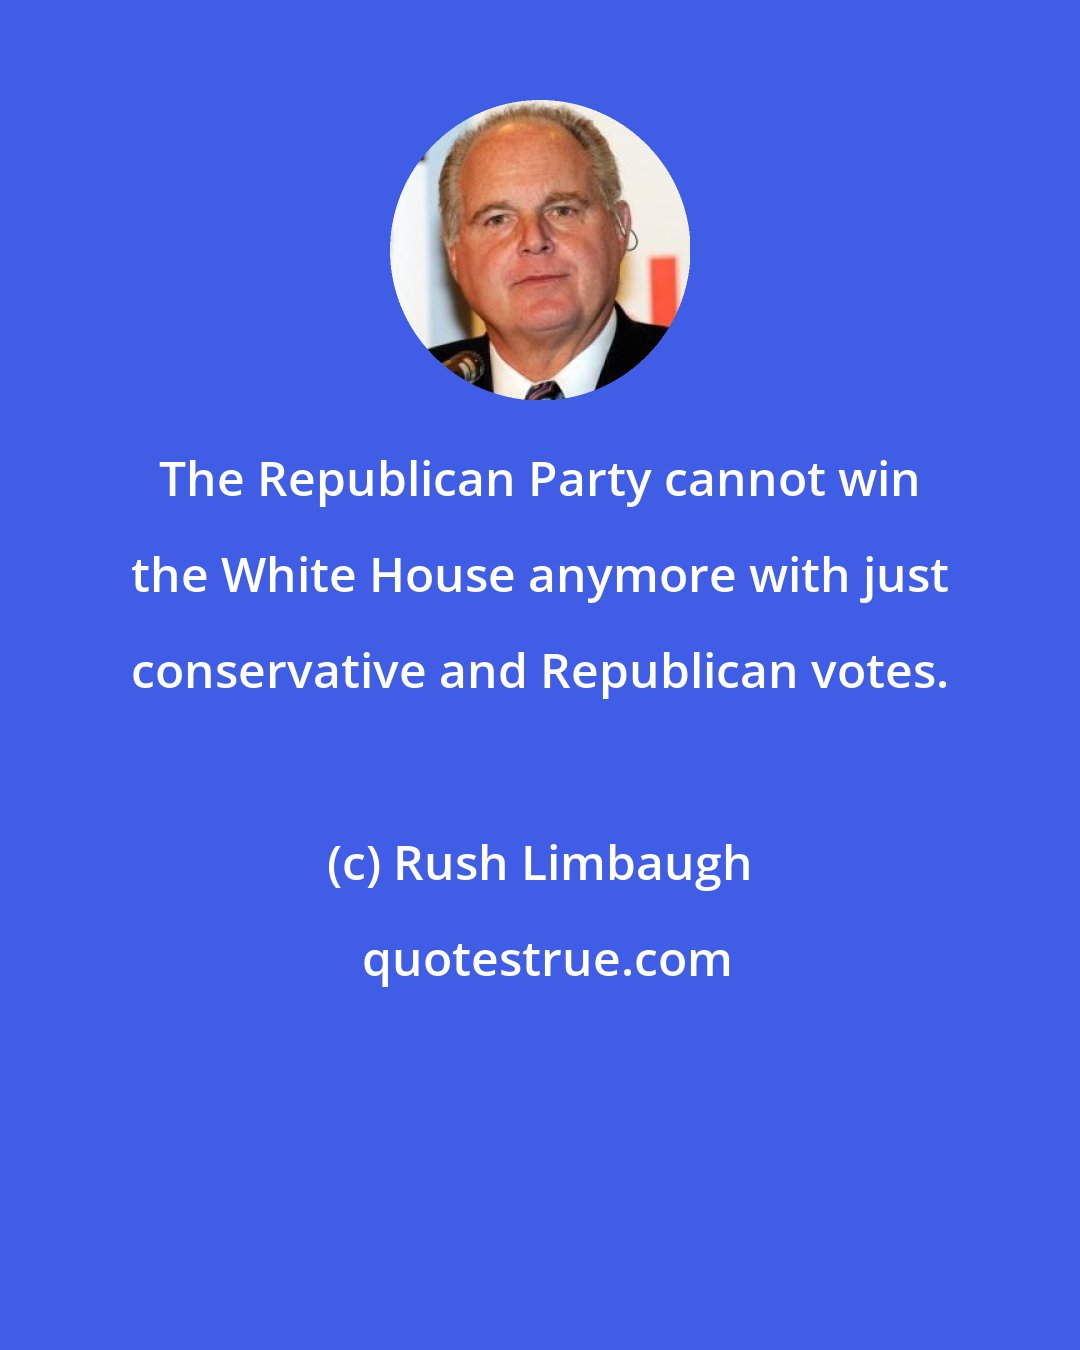 Rush Limbaugh: The Republican Party cannot win the White House anymore with just conservative and Republican votes.